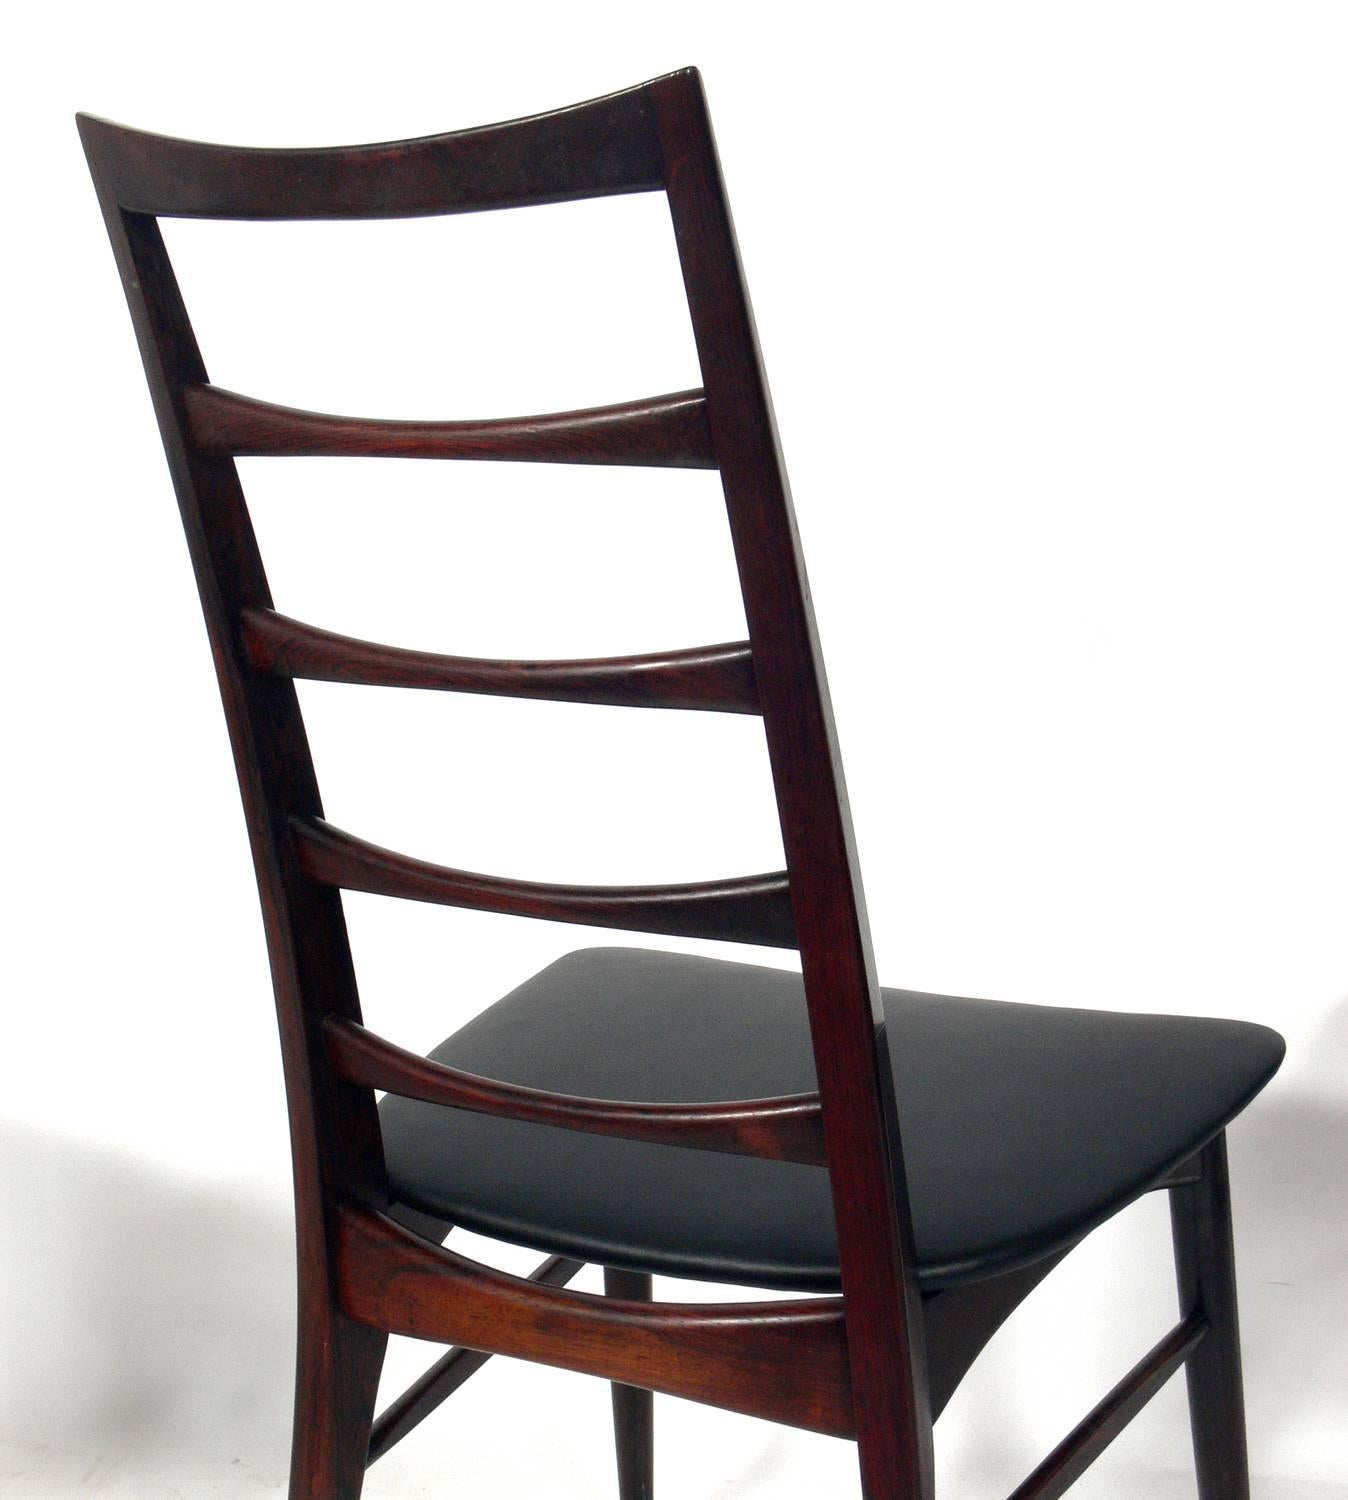 Upholstery Danish Modern Rosewood Dining Chairs by Niels Koefoed